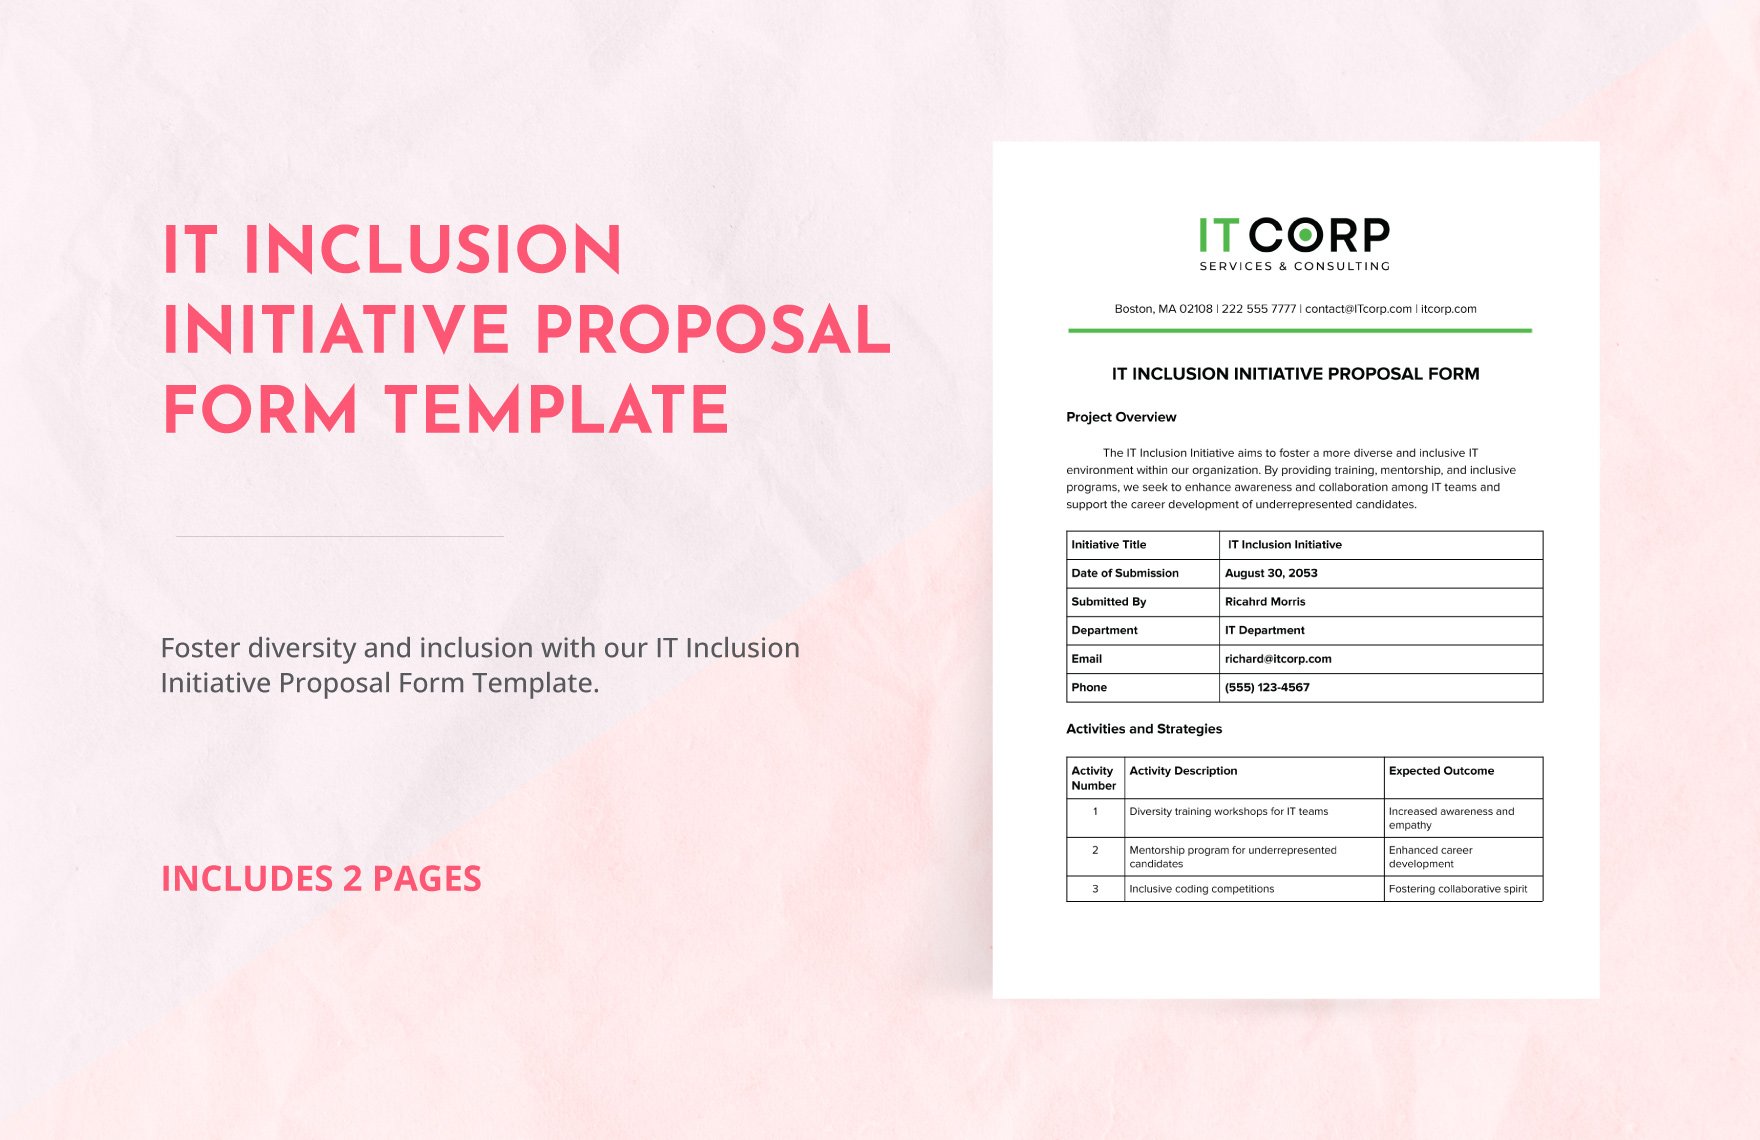 IT Inclusion Initiative Proposal Form Template